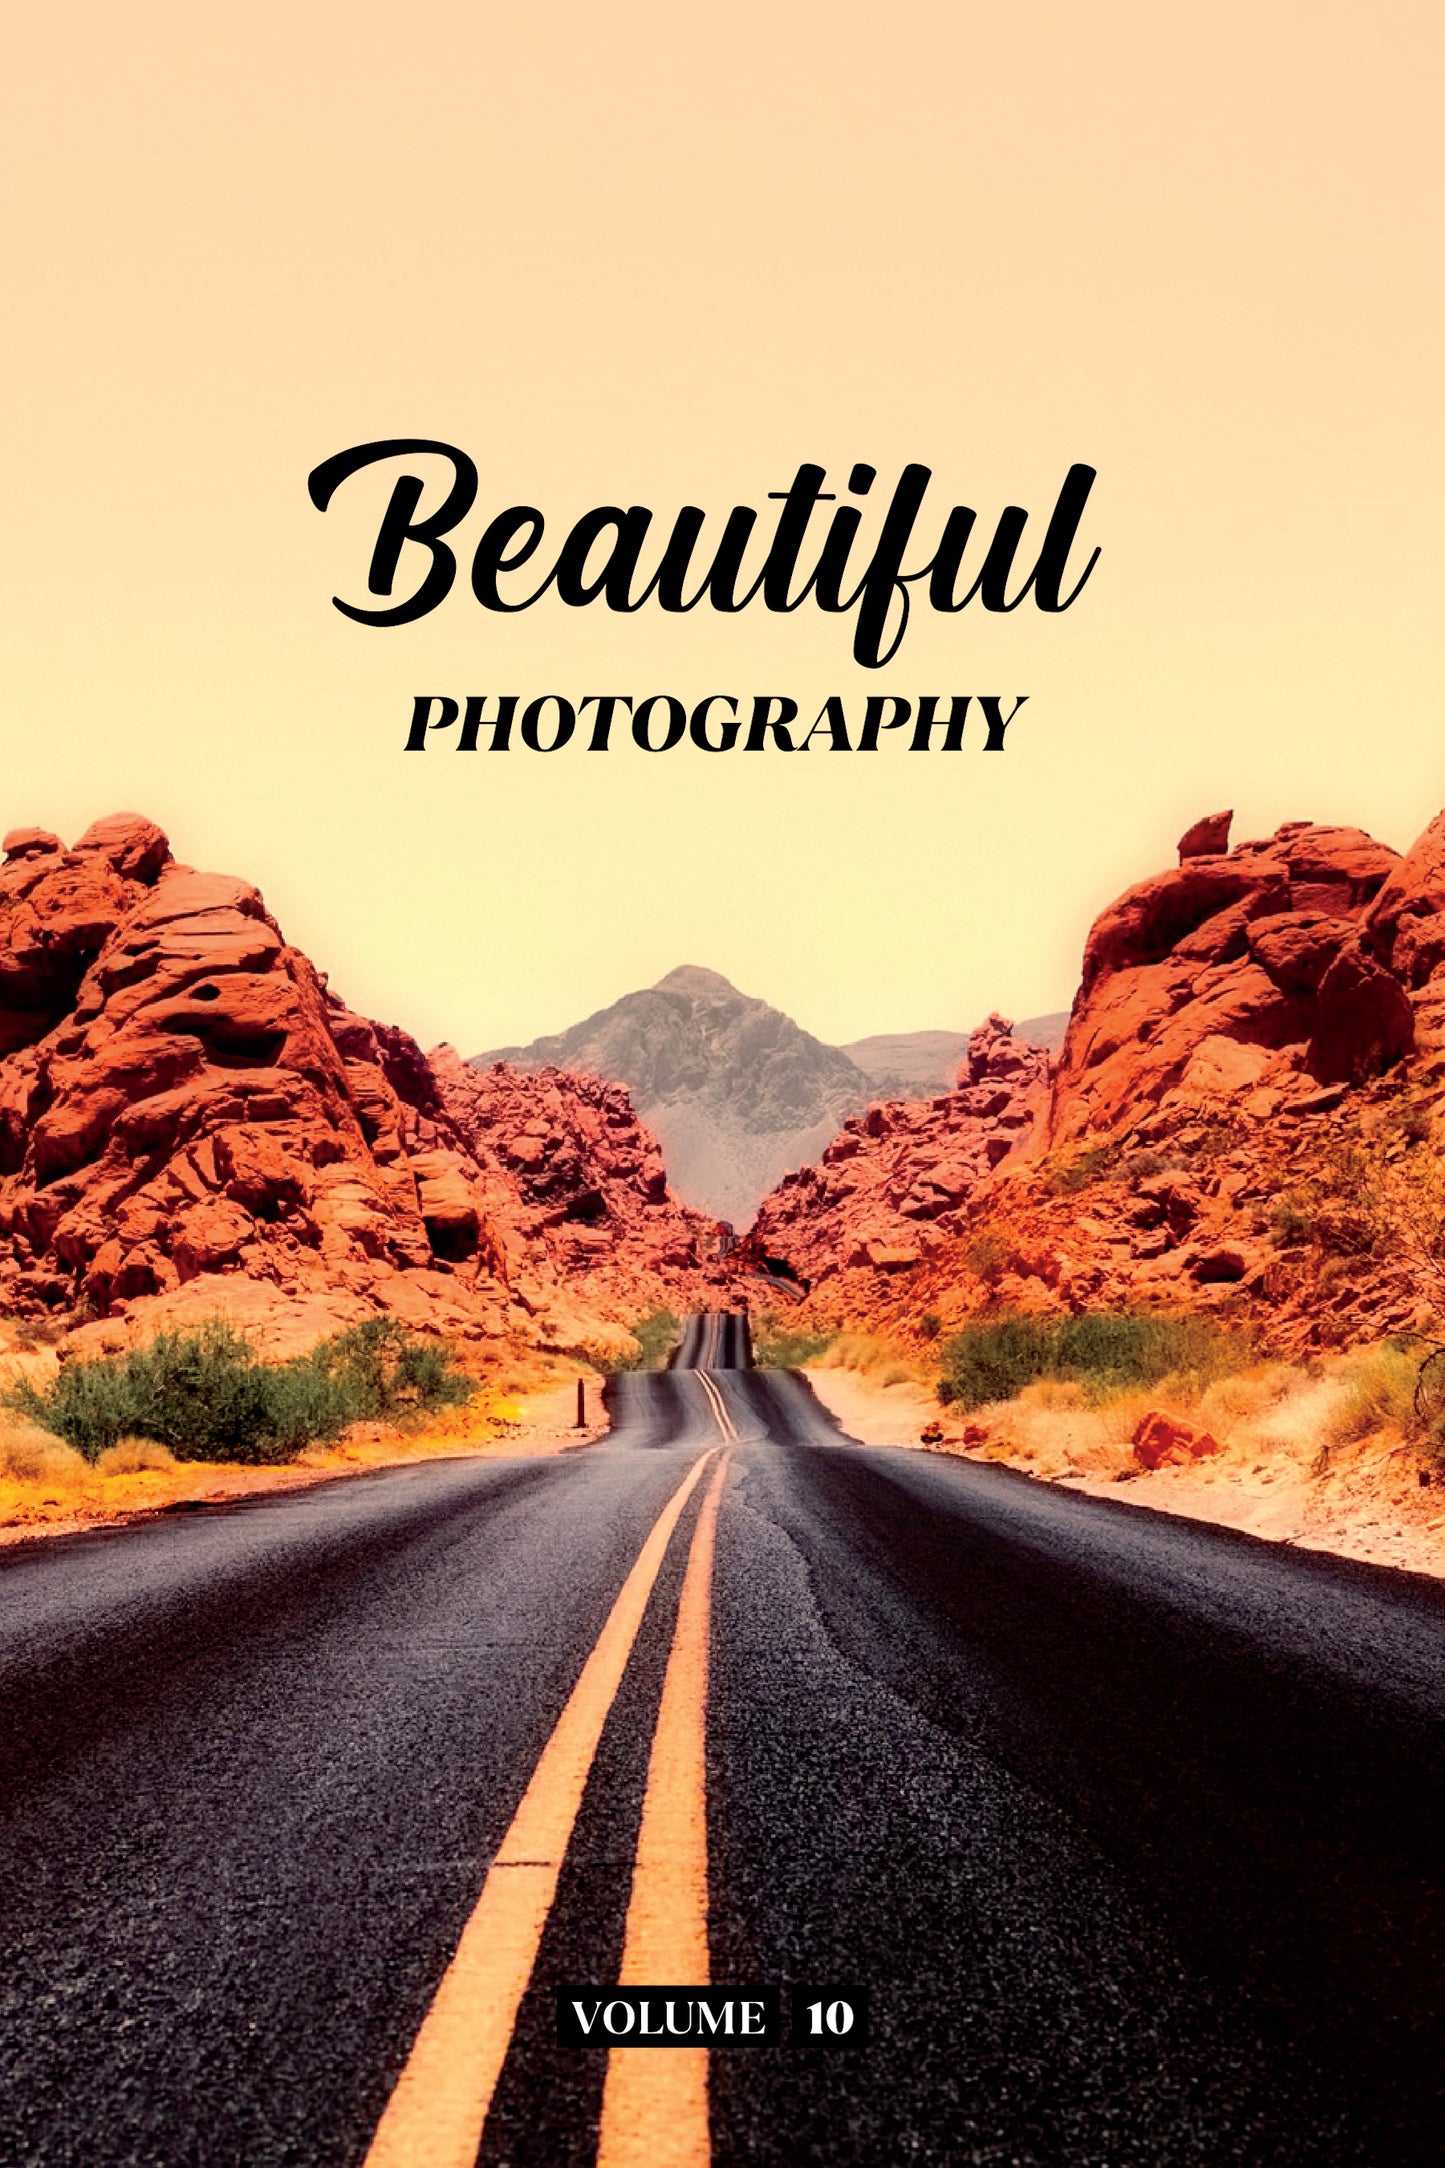 Beautiful Photography Volume 10 (Physical Book)